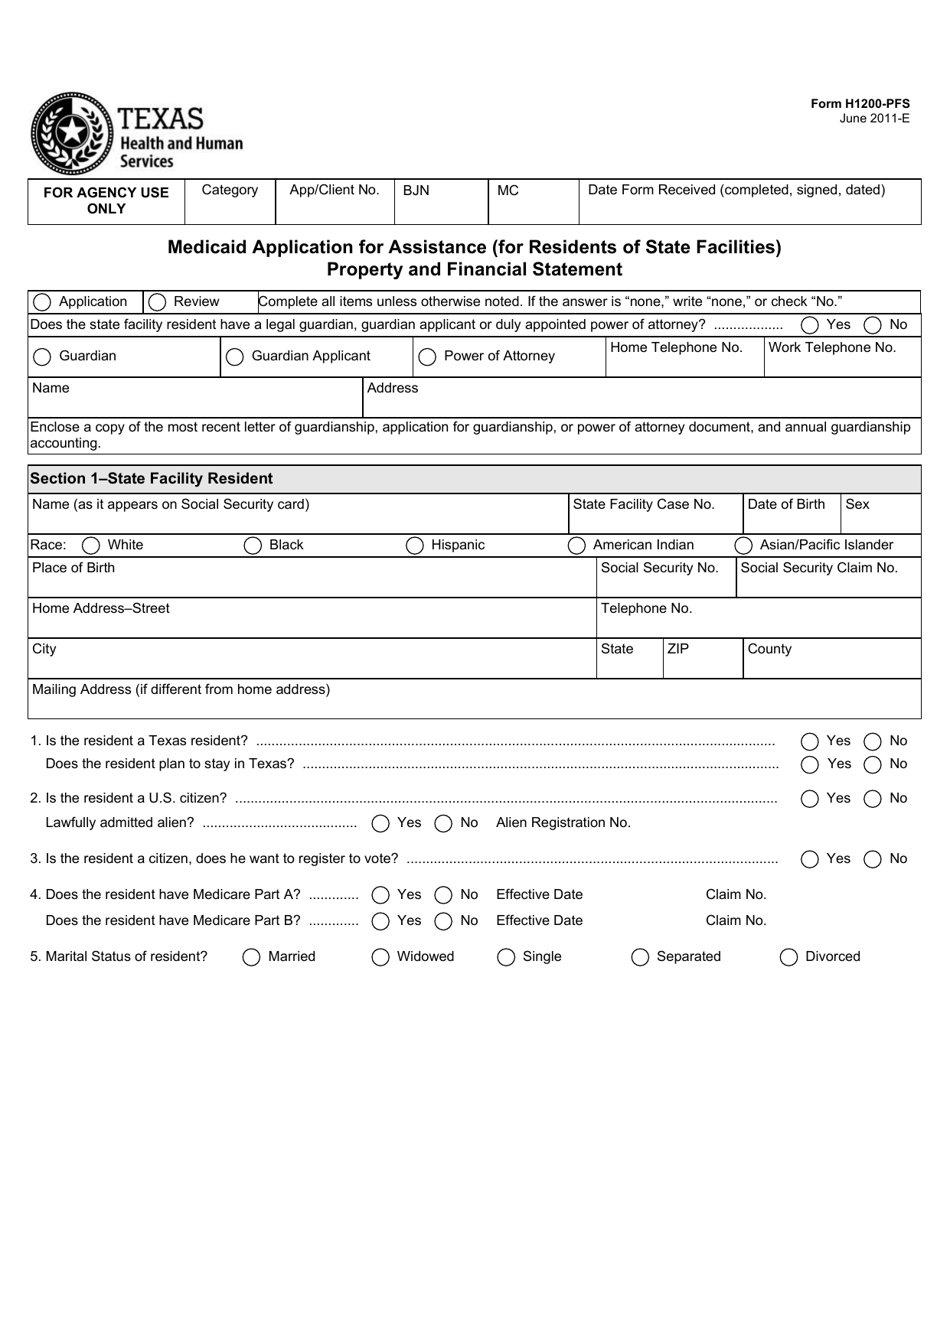 Form H1200-PFS Medicaid Application for Assistance (For Residents of State Facilities) Property and Financial Statement - Texas, Page 1